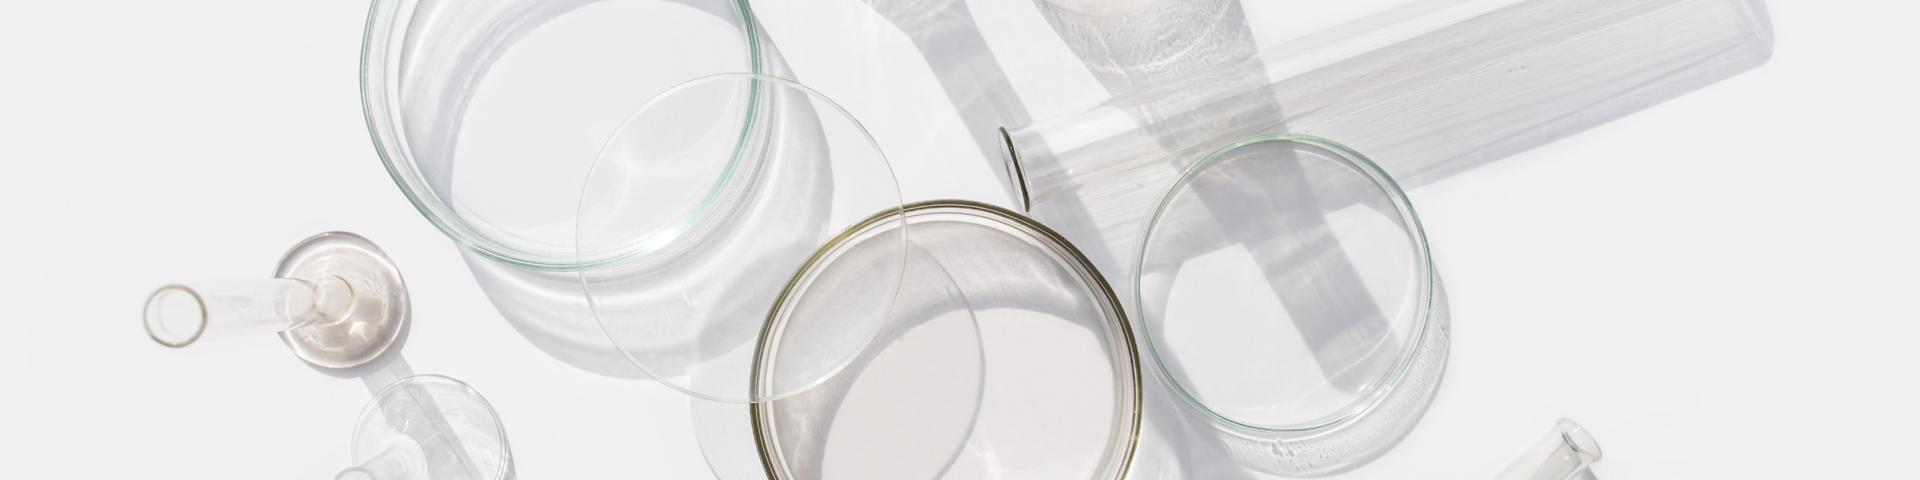 Petri dishes and test tubes placed on a table as a part of a clinical trial.